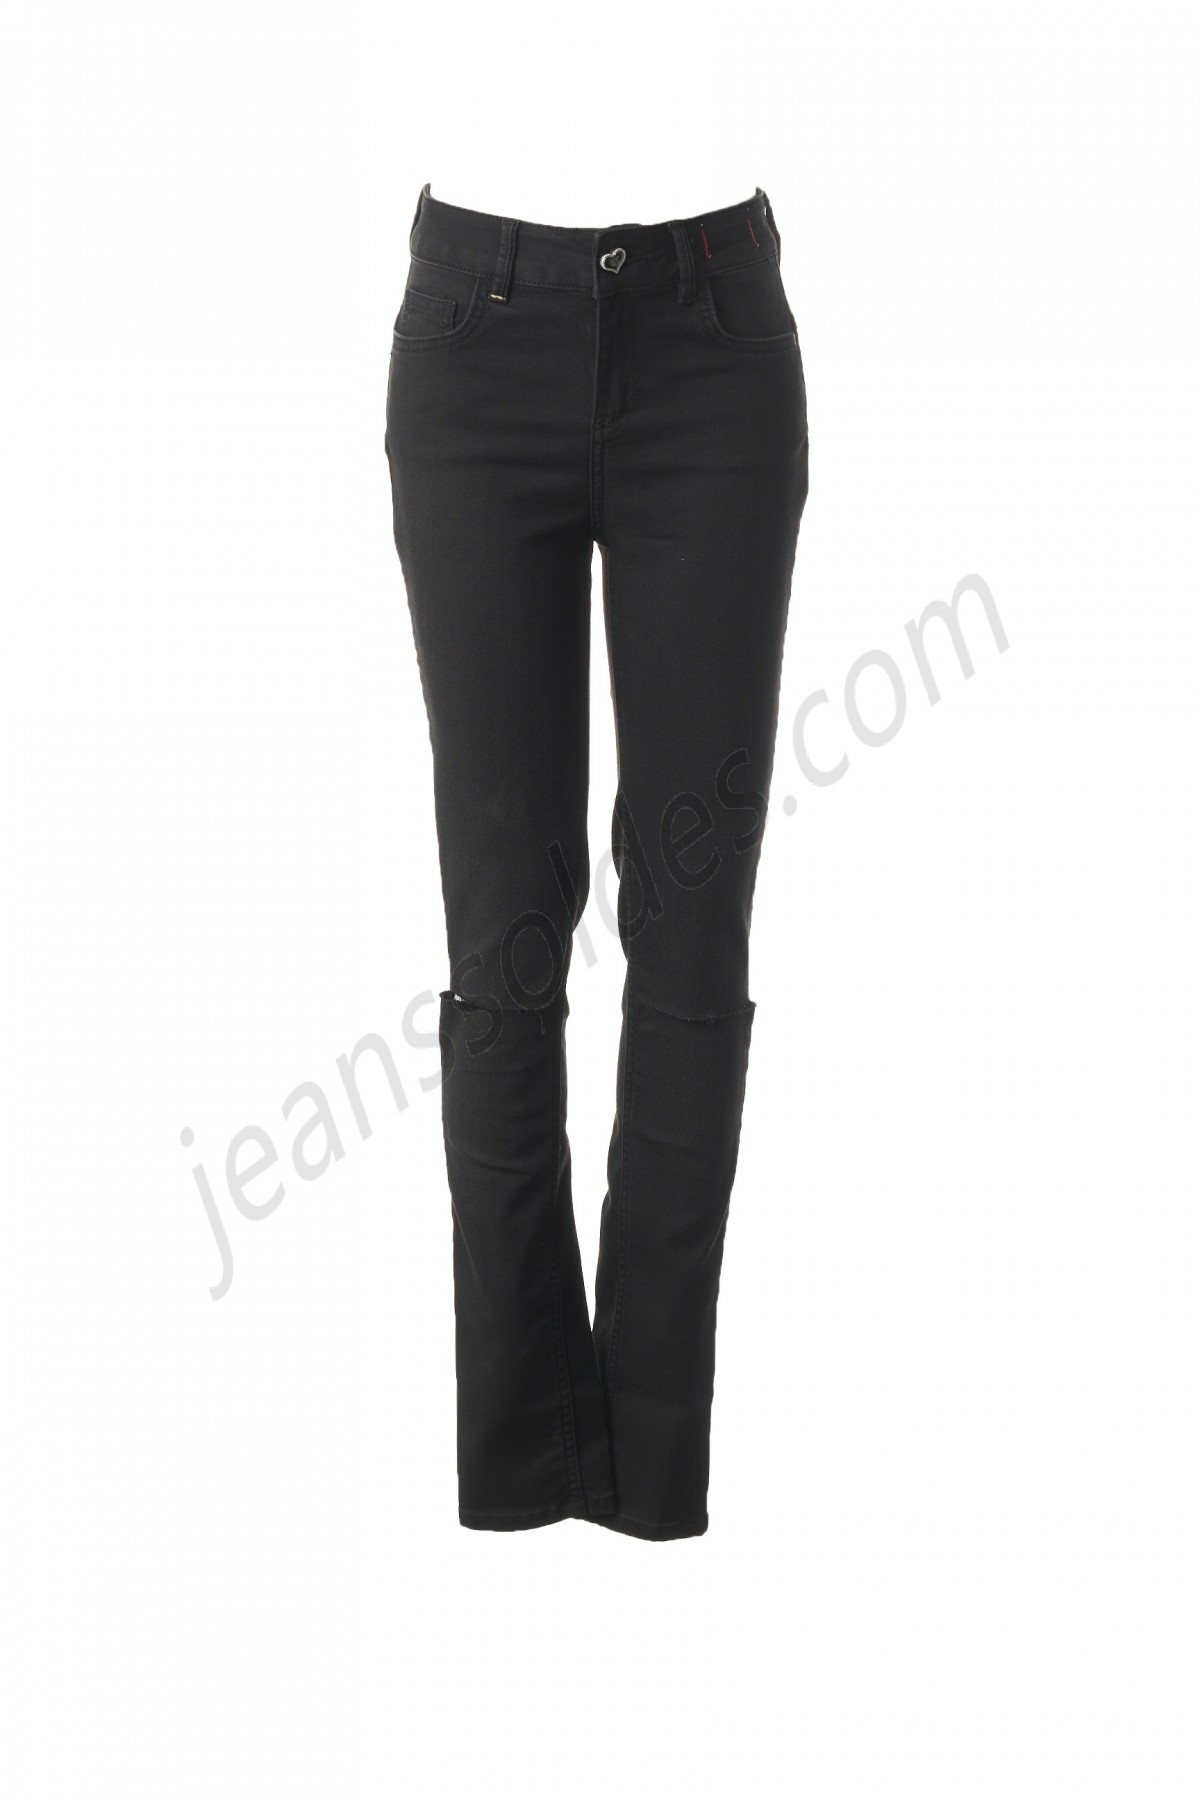 my twin-Jeans coupe slim prix d’amis - -0